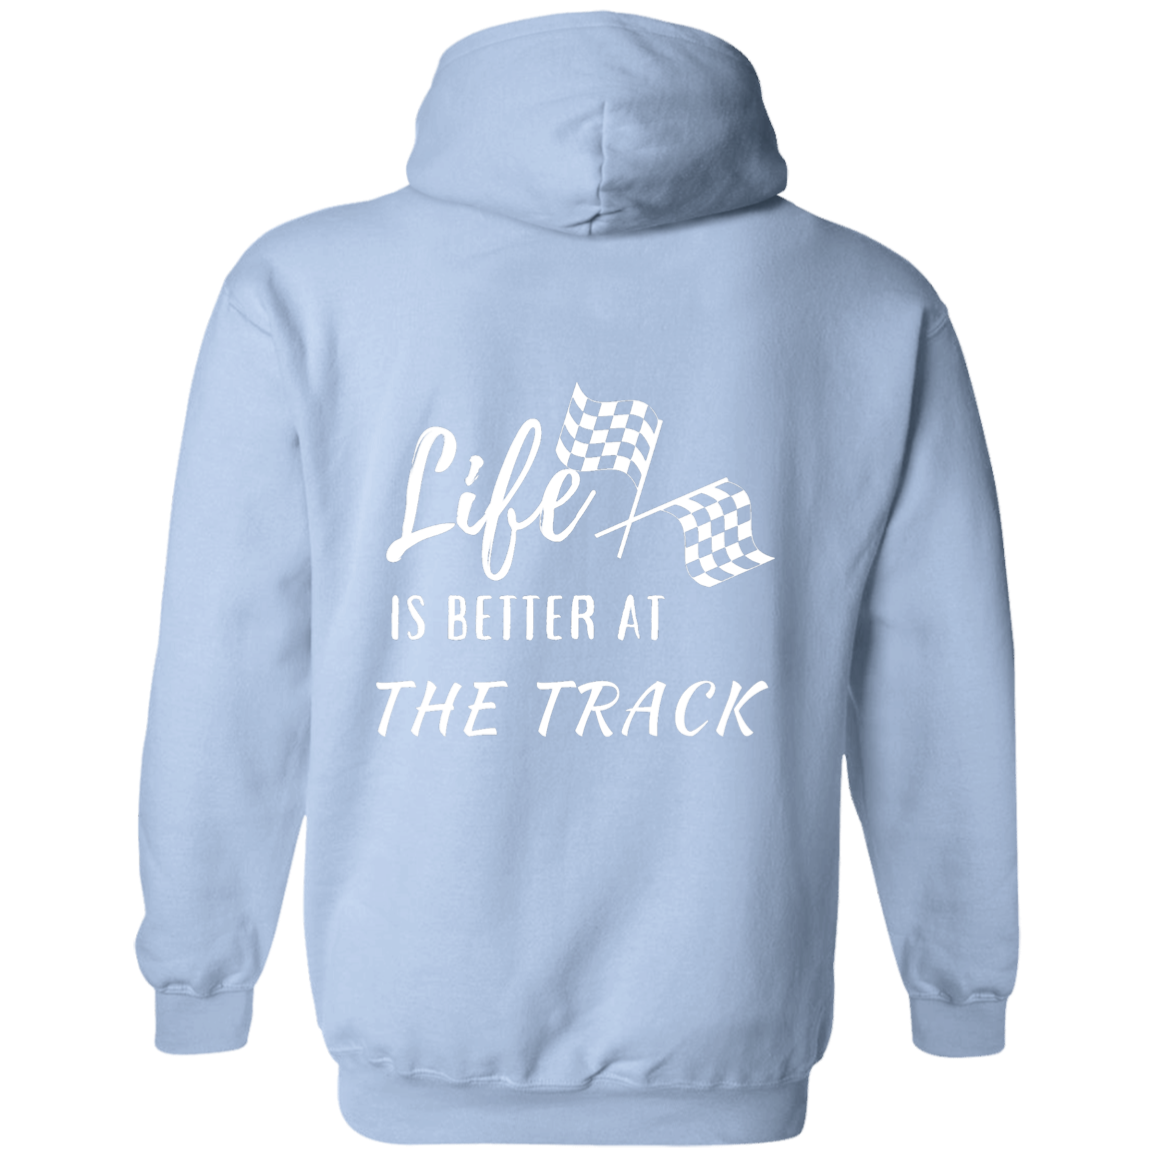 Race Track Unisex  Pullover Hoodie Soft & Comfy